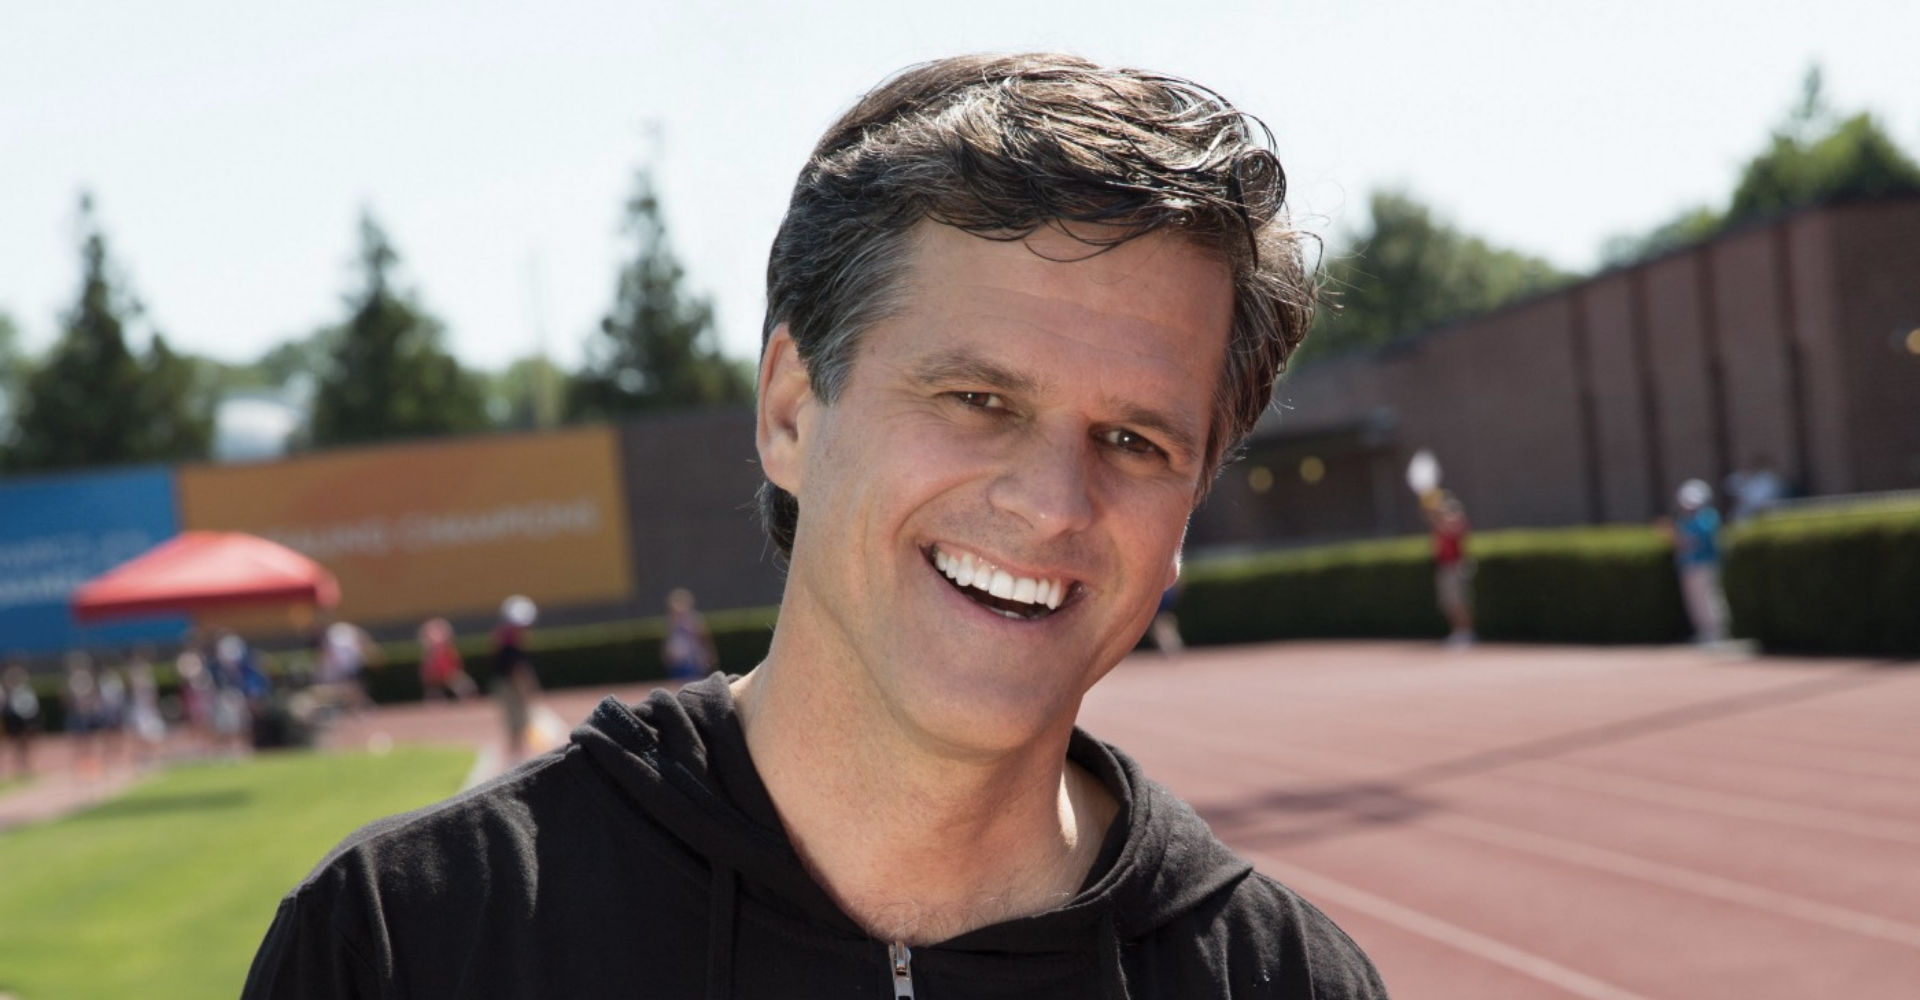 Sunday Paper Live | Conversations with Tim Shriver on the Social and Emotional Skills We All Need